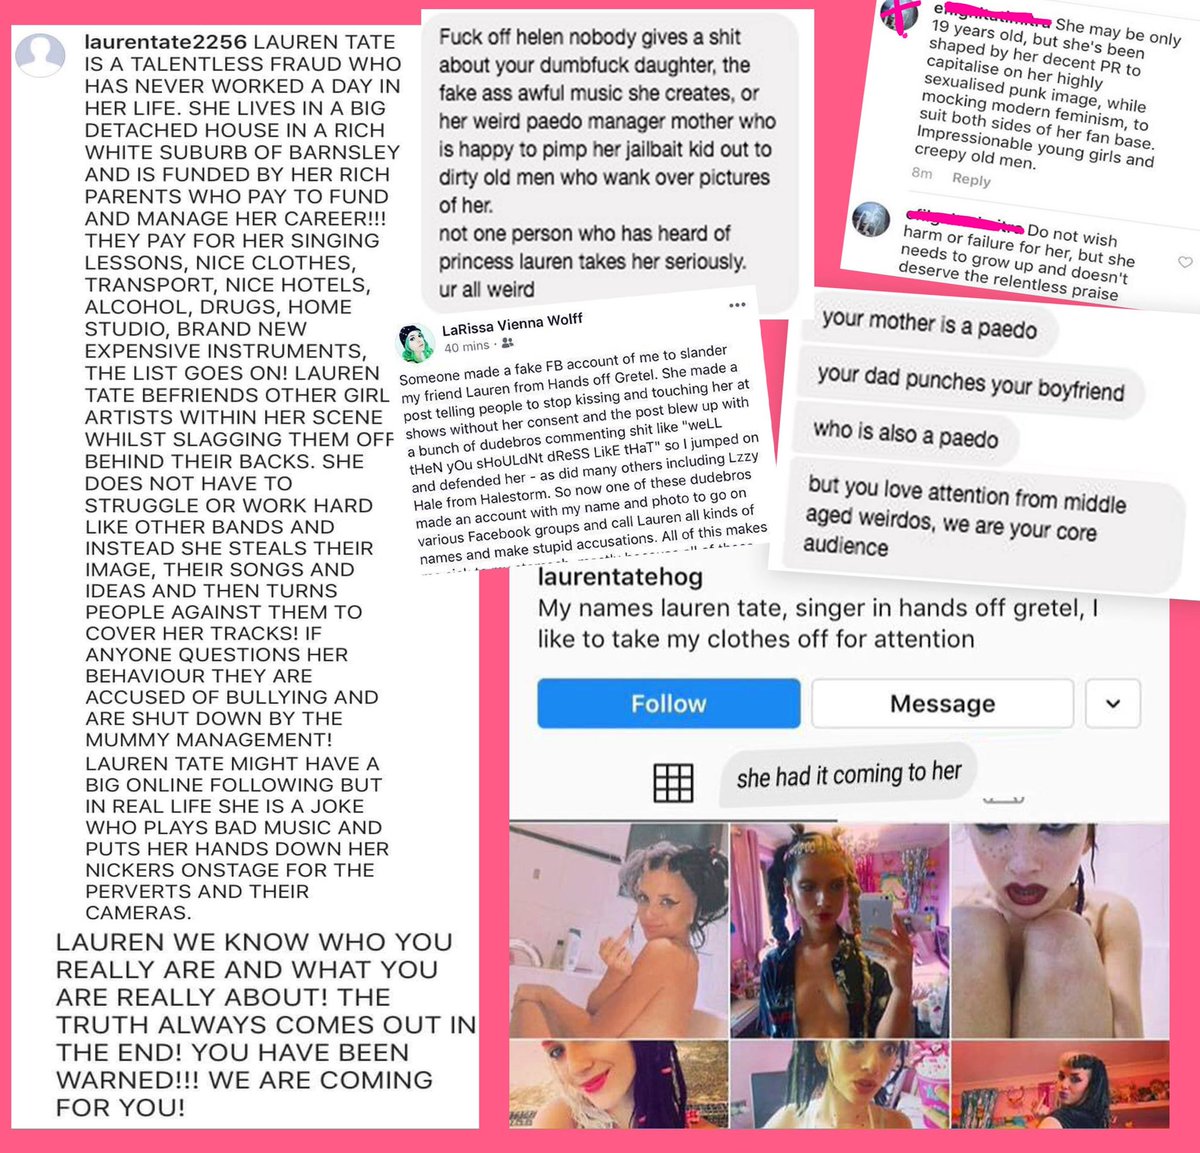 These screen shots also show more abuse I had to cope with in regards to other women in bands as I was accused of telling girls to kill themselves as this fake account posed as me. THIS IS THE END now   #timetoheal  #itsover